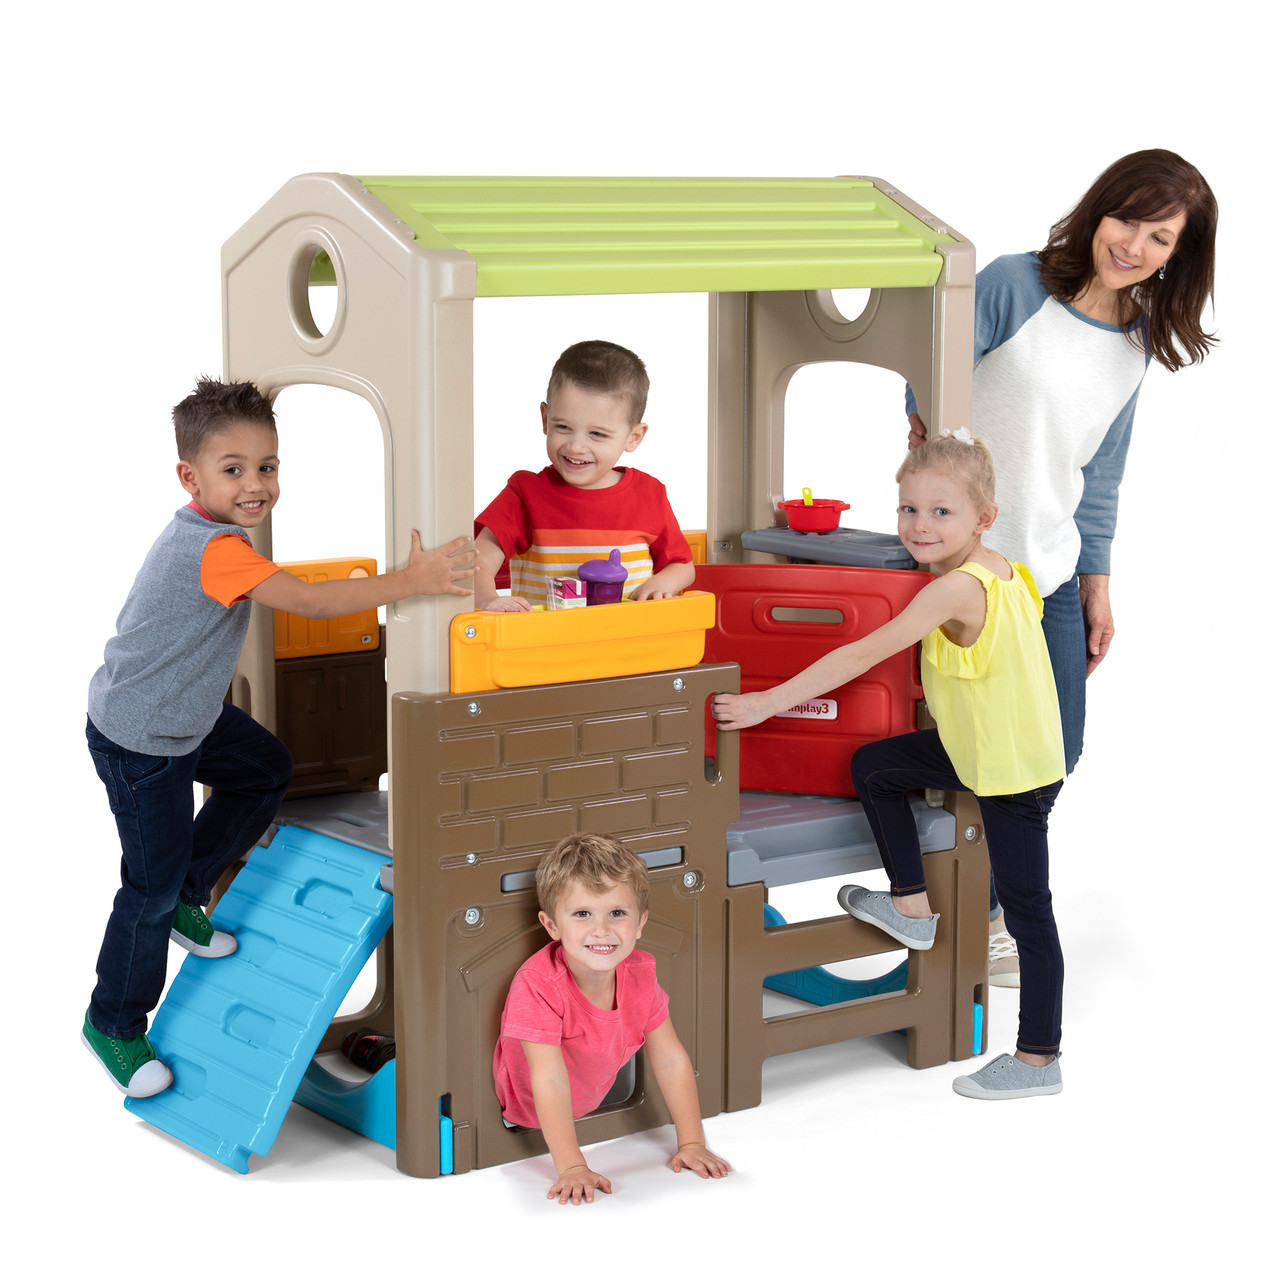 Modular Play Couch – InteractiV Kids